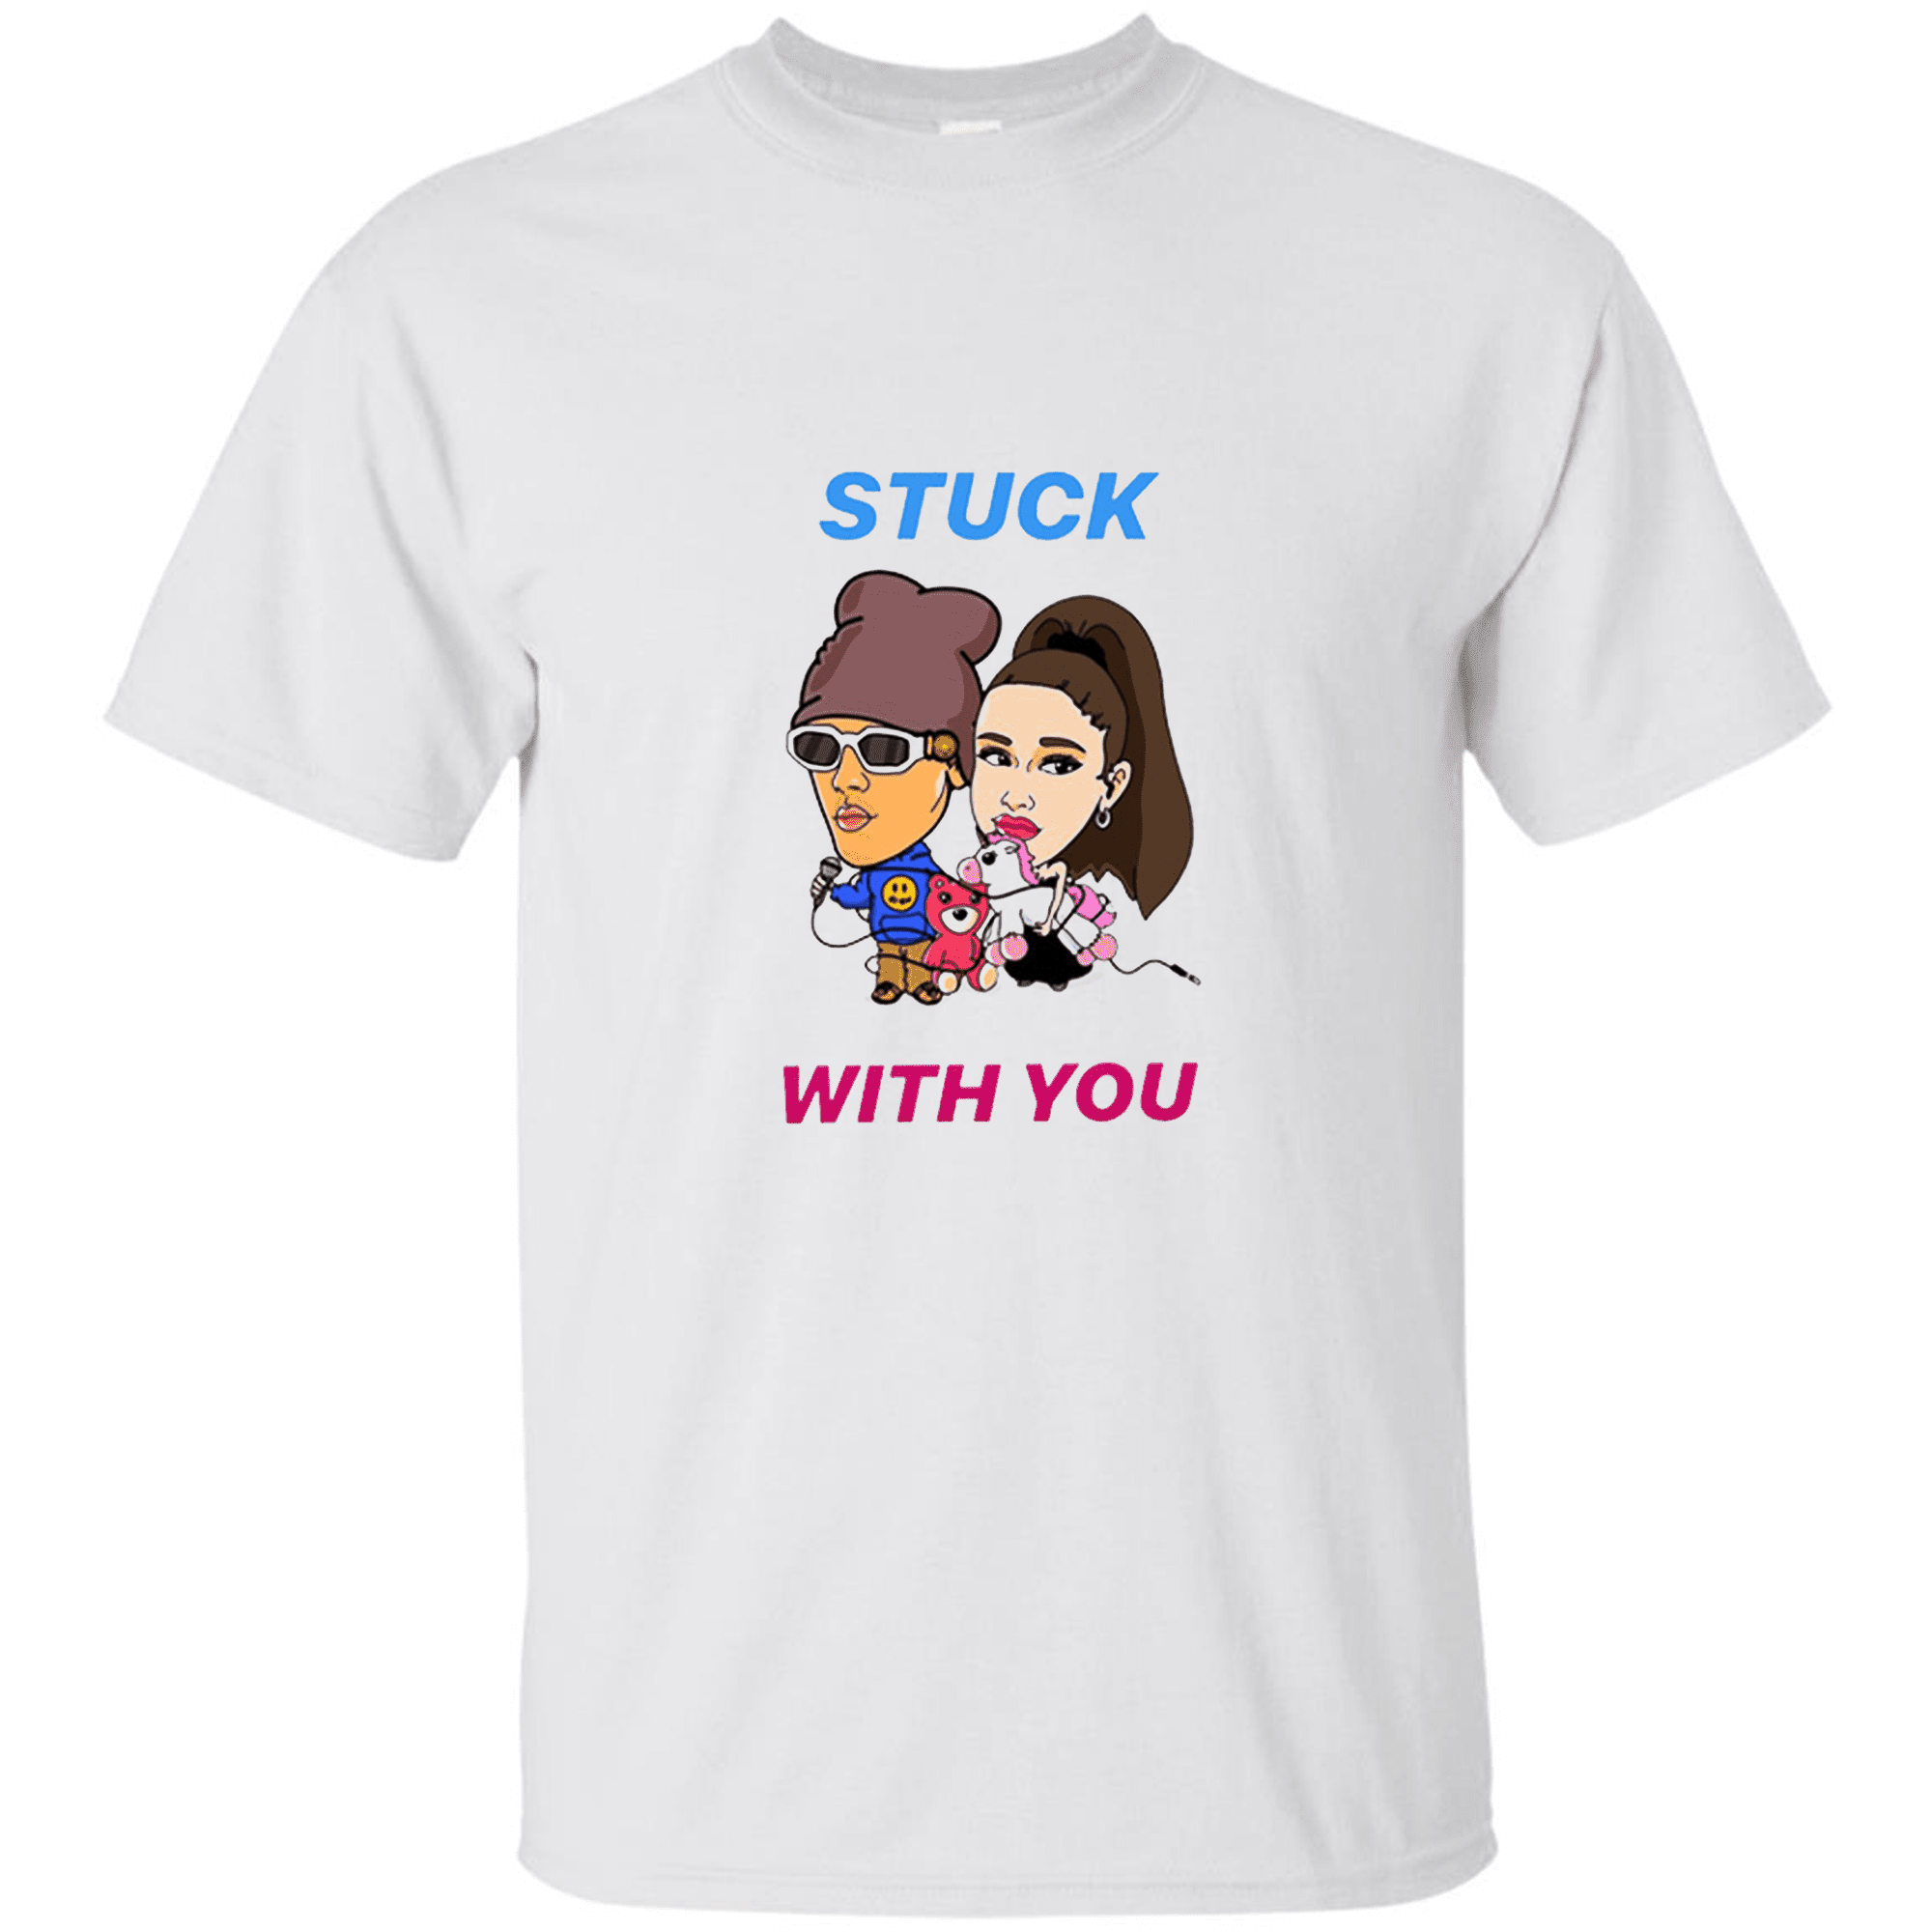 Stuck With U Ariana Grande And Justin Bieber T Shirt By Clothenvy - shower becky g roblox